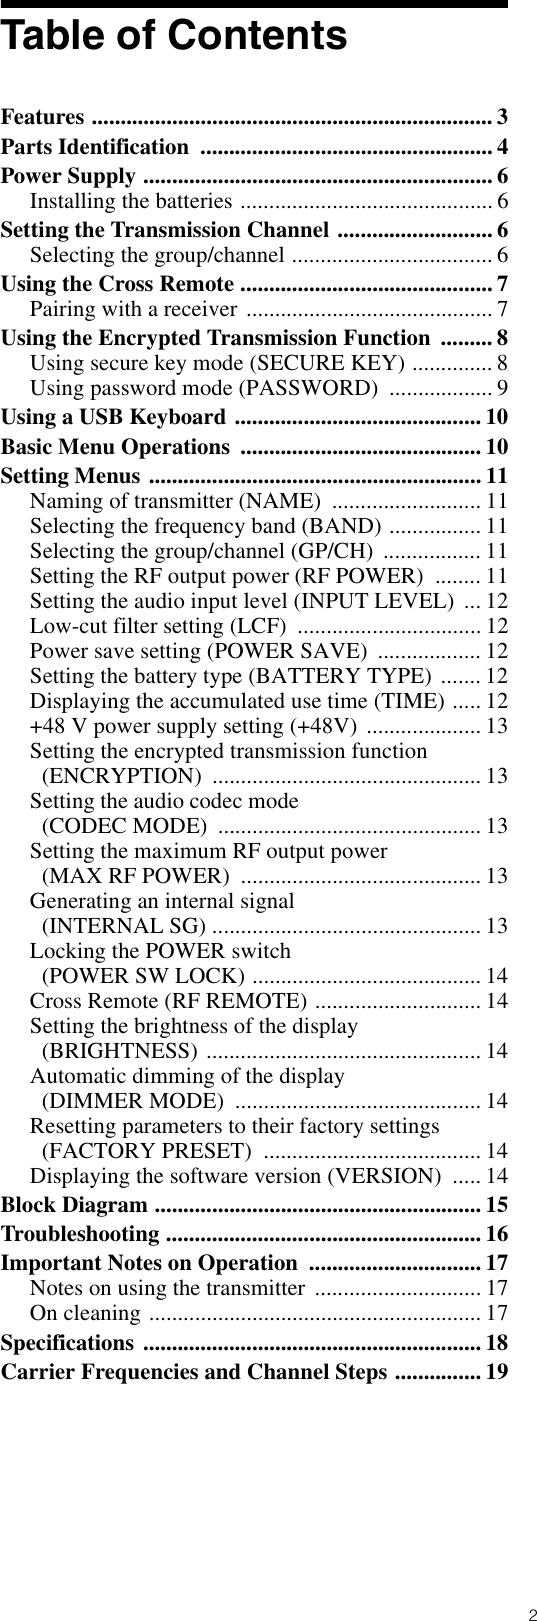 2Table of ContentsFeatures ...................................................................... 3Parts Identification  ................................................... 4Power Supply ............................................................. 6Installing the batteries ............................................ 6Setting the Transmission Channel ........................... 6Selecting the group/channel ................................... 6Using the Cross Remote ............................................ 7Pairing with a receiver ........................................... 7Using the Encrypted Transmission Function  ......... 8Using secure key mode (SECURE KEY) .............. 8Using password mode (PASSWORD)  .................. 9Using a USB Keyboard ........................................... 10Basic Menu Operations  .......................................... 10Setting Menus .......................................................... 11Naming of transmitter (NAME)  .......................... 11Selecting the frequency band (BAND) ................ 11Selecting the group/channel (GP/CH)  ................. 11Setting the RF output power (RF POWER)  ........ 11Setting the audio input level (INPUT LEVEL)  ... 12Low-cut filter setting (LCF)  ................................ 12Power save setting (POWER SAVE)  .................. 12Setting the battery type (BATTERY TYPE) ....... 12Displaying the accumulated use time (TIME) ..... 12+48 V power supply setting (+48V)  .................... 13Setting the encrypted transmission function (ENCRYPTION) ............................................... 13Setting the audio codec mode (CODEC MODE)  .............................................. 13Setting the maximum RF output power (MAX RF POWER)  .......................................... 13Generating an internal signal (INTERNAL SG) ............................................... 13Locking the POWER switch (POWER SW LOCK) ........................................ 14Cross Remote (RF REMOTE) ............................. 14Setting the brightness of the display (BRIGHTNESS) ................................................ 14Automatic dimming of the display (DIMMER MODE)  ........................................... 14Resetting parameters to their factory settings (FACTORY PRESET)  ...................................... 14Displaying the software version (VERSION)  ..... 14Block Diagram ......................................................... 15Troubleshooting ....................................................... 16Important Notes on Operation  .............................. 17Notes on using the transmitter  ............................. 17On cleaning .......................................................... 17Specifications ........................................................... 18Carrier Frequencies and Channel Steps ............... 19